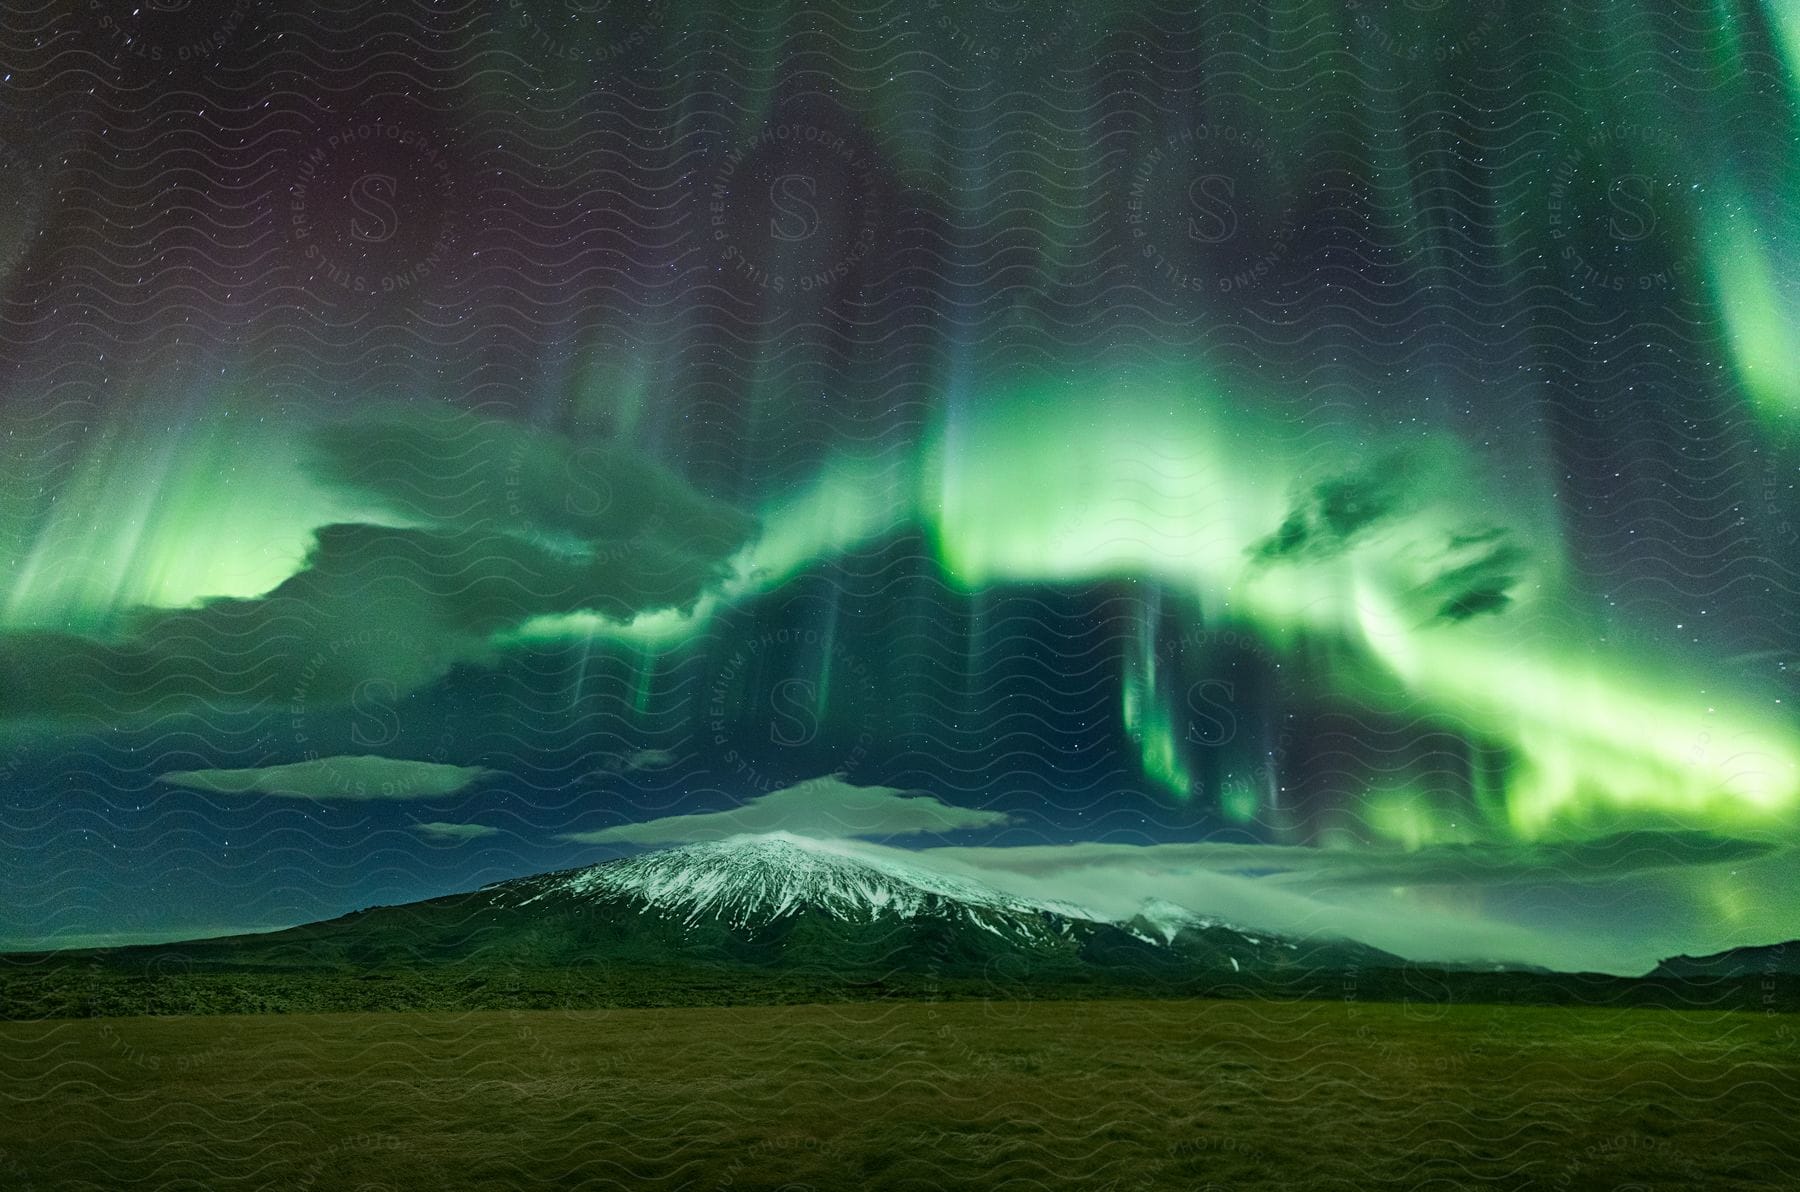 Aurora borealis lights stretch over snowcovered mountain under starry night sky